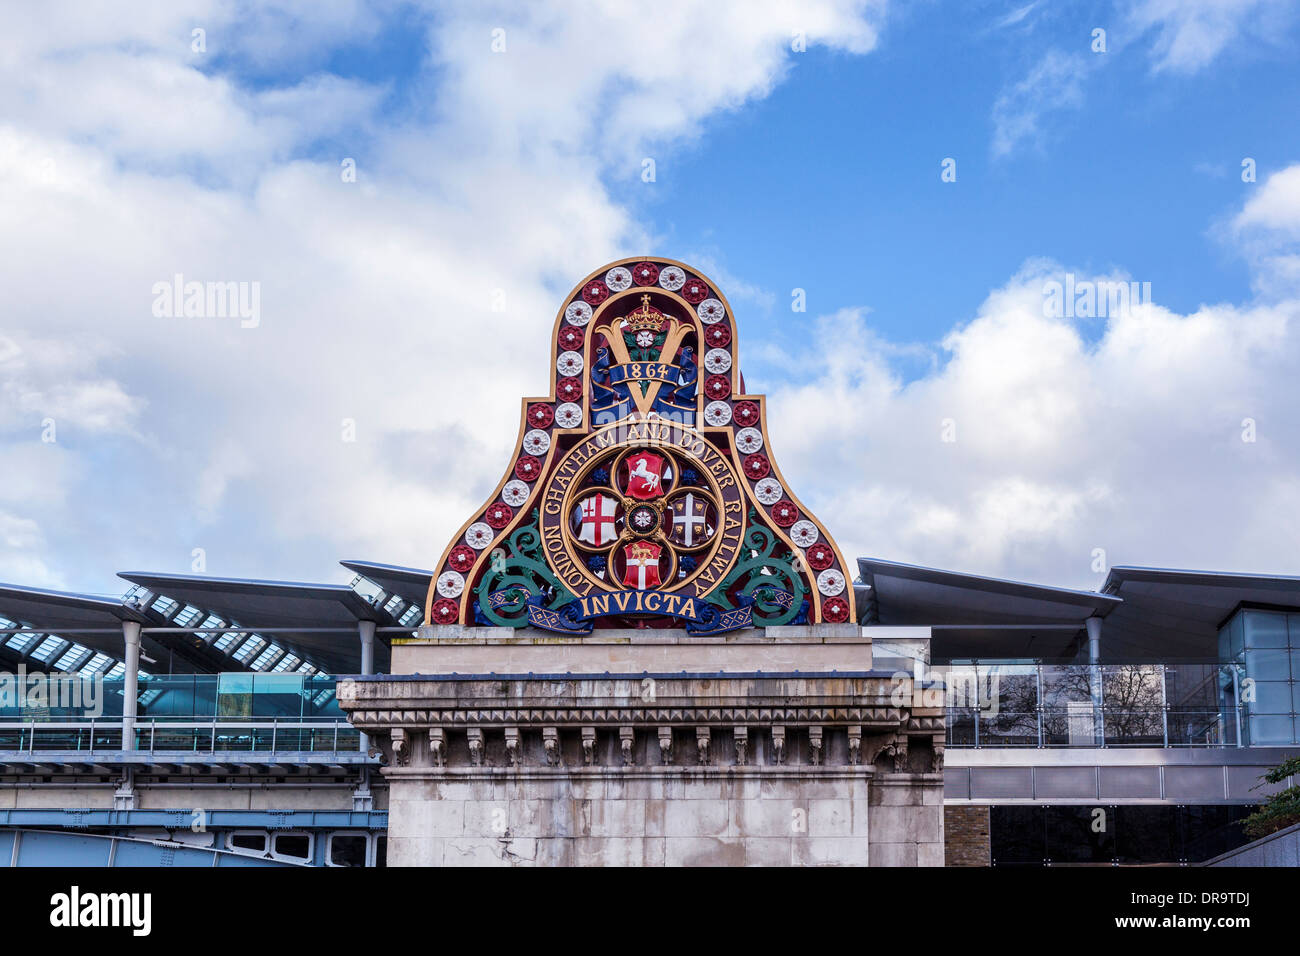 London Chatham and Dover railway crest with Invicta motto and solar panels of Blackfriars railway station, London, UK Stock Photo